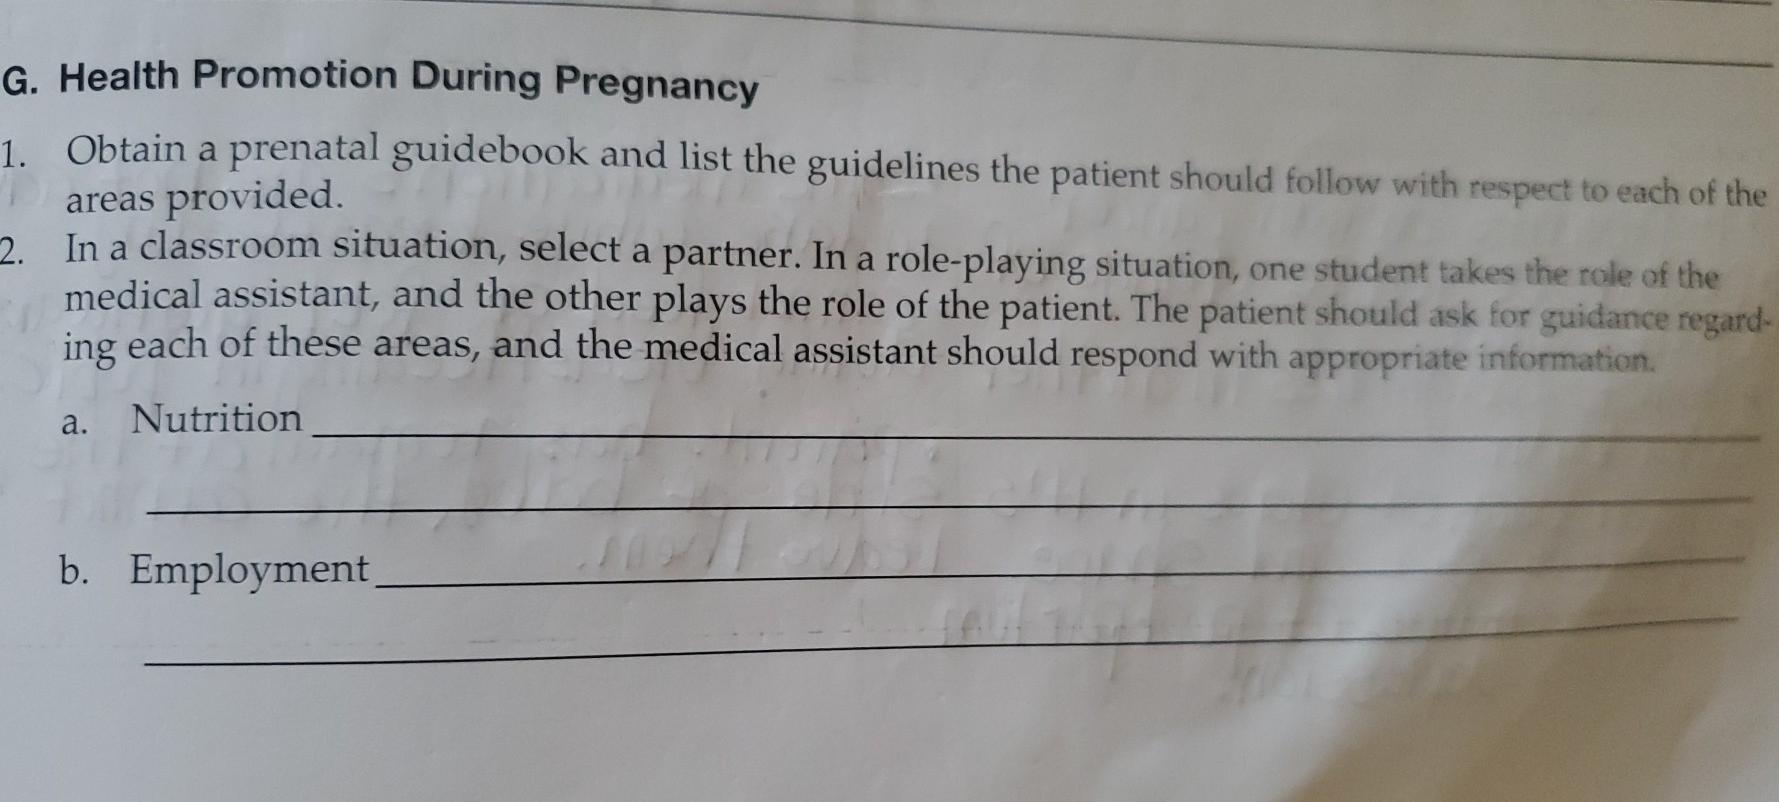 G Health Promotion During Pregnancy 1 Obtain A Prenatal Guidebook And List The Guidelines The Patient Should Follow Wi 1